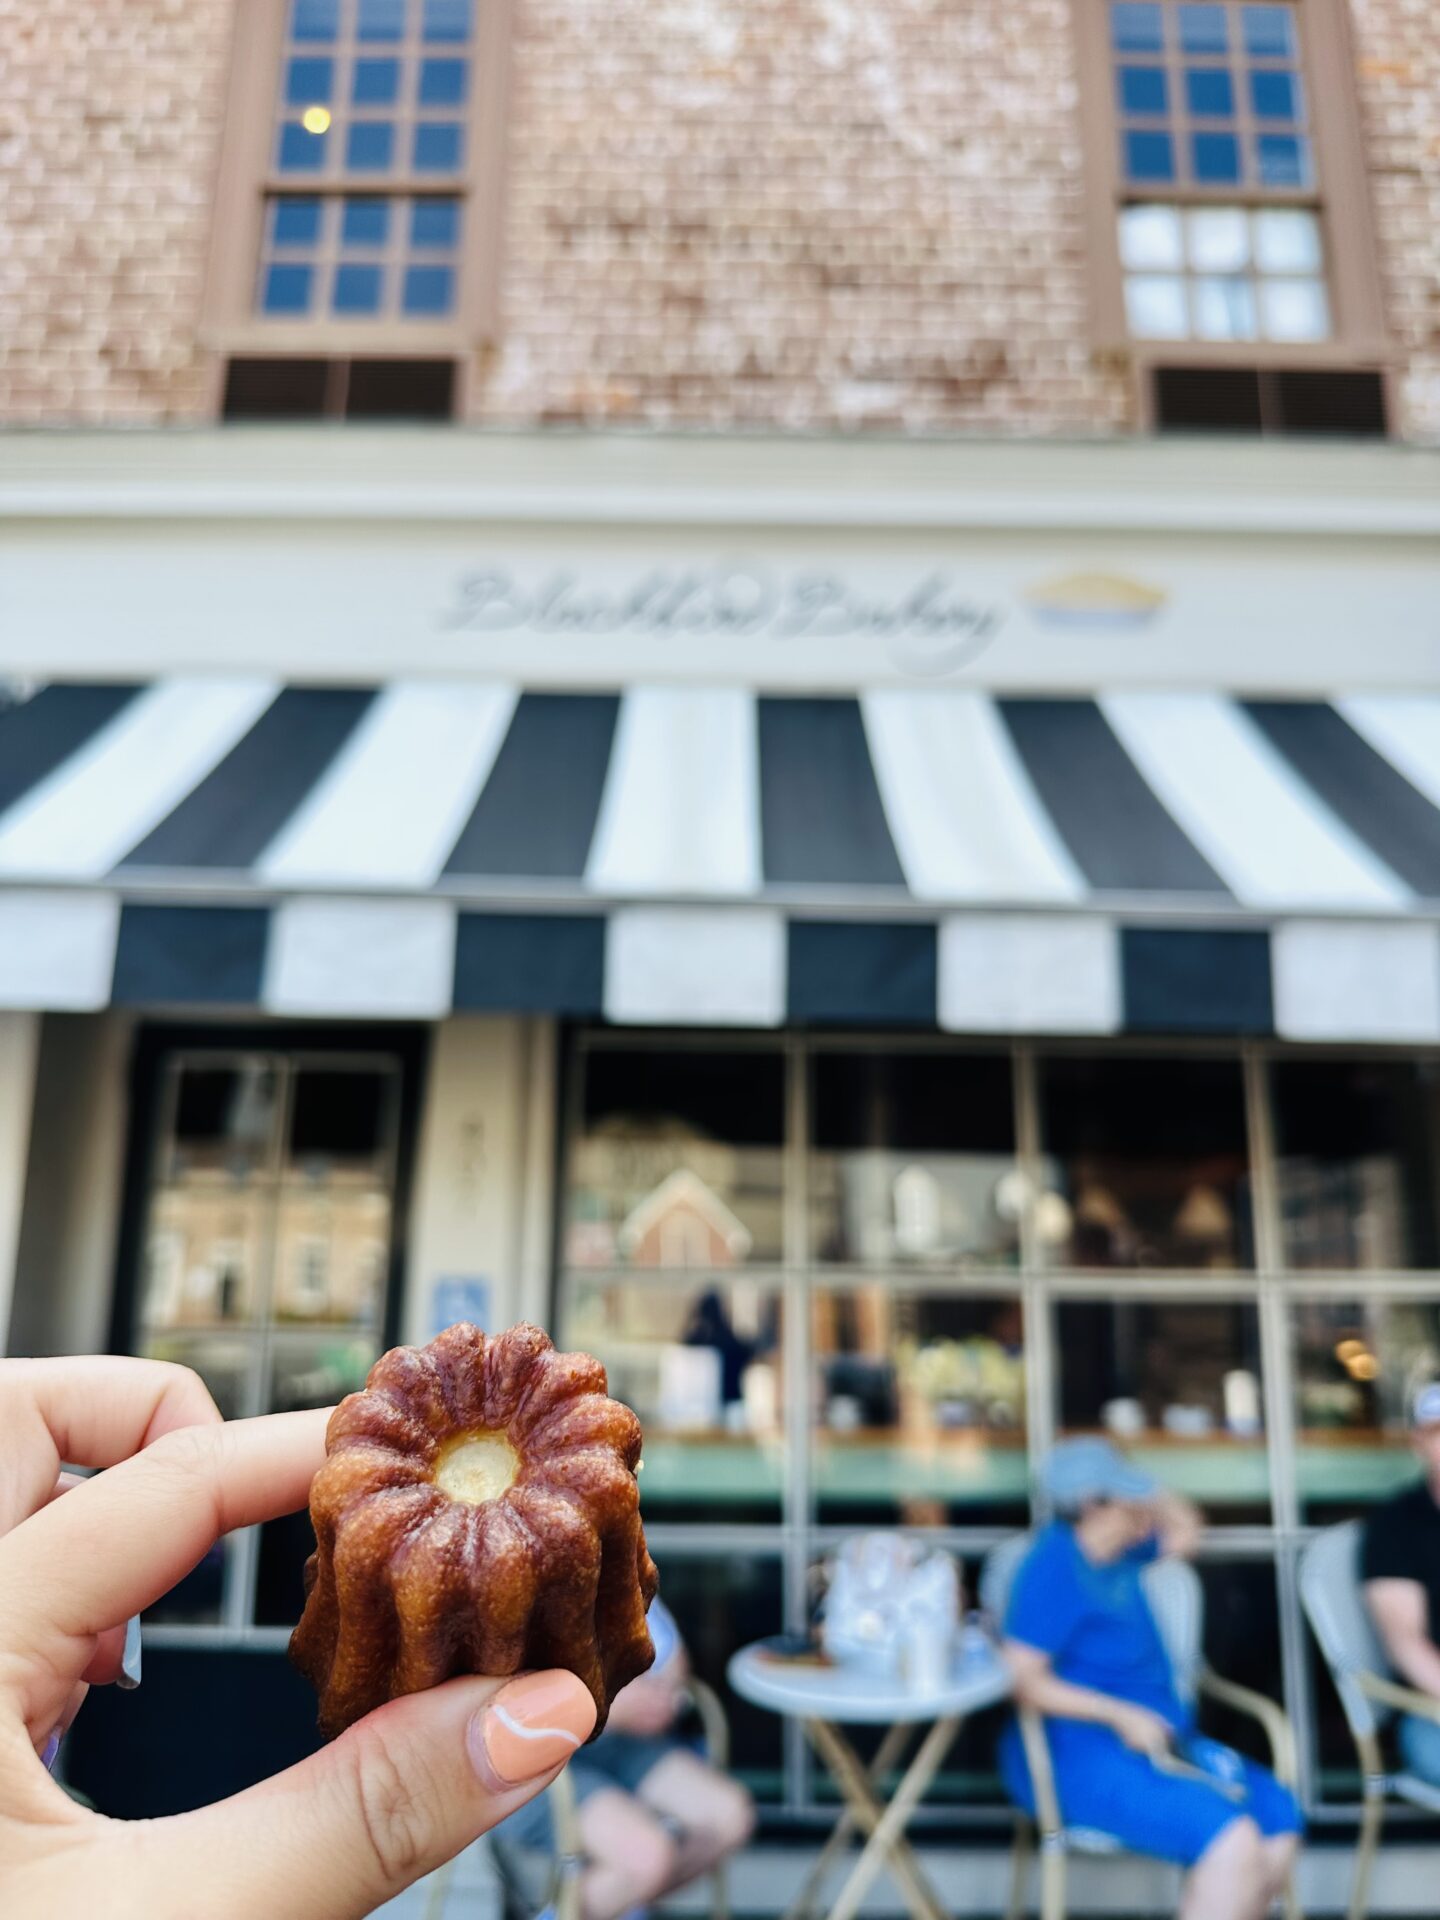 Eastern virginia: a person holding a cannele outside of Blackbird Bakery in Yorktown